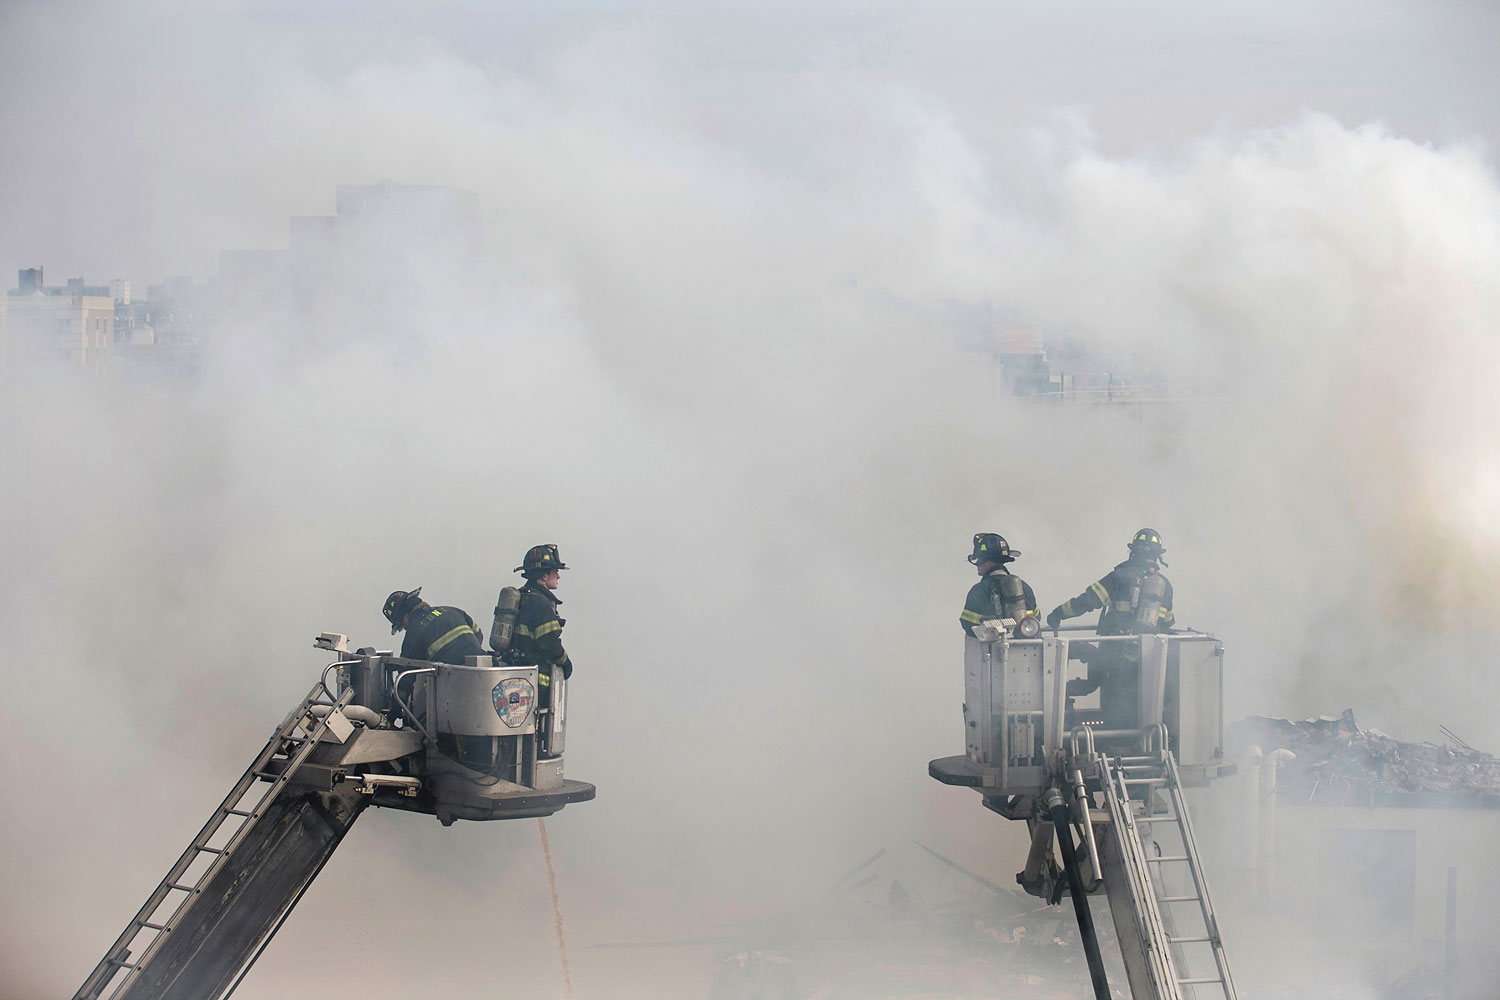 Firefighters respond to an explosion that leveled two apartment buildings in the East Harlem neighborhood of New York, March 12, 2014.